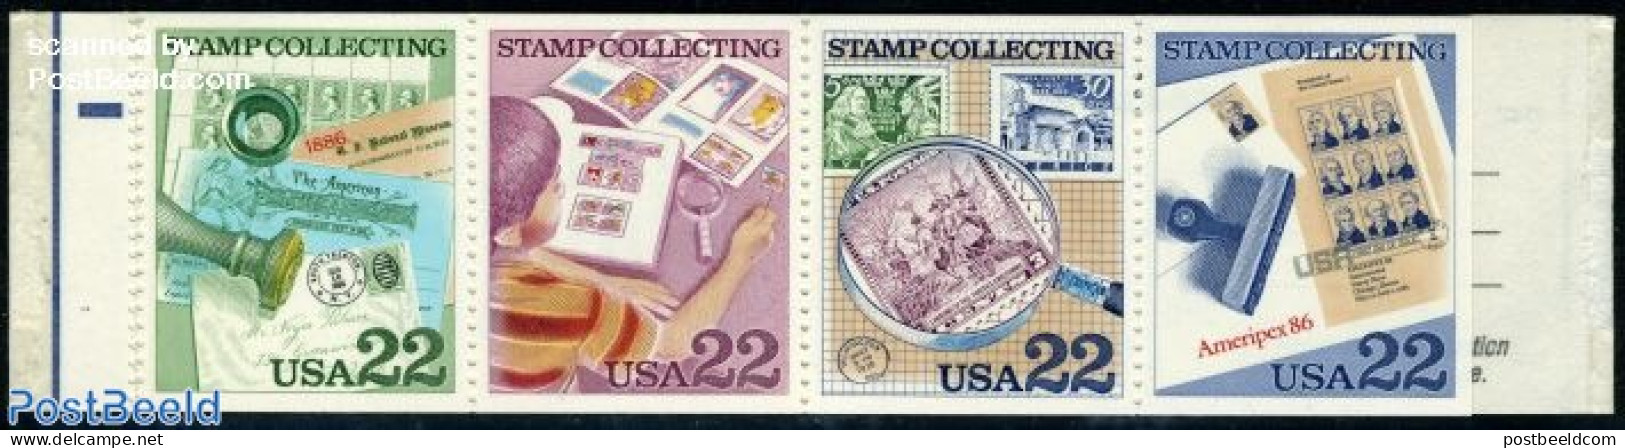 United States Of America 1986 Ameripex Booklet, Mint NH, Philately - Stamp Booklets - Stamps On Stamps - Ongebruikt